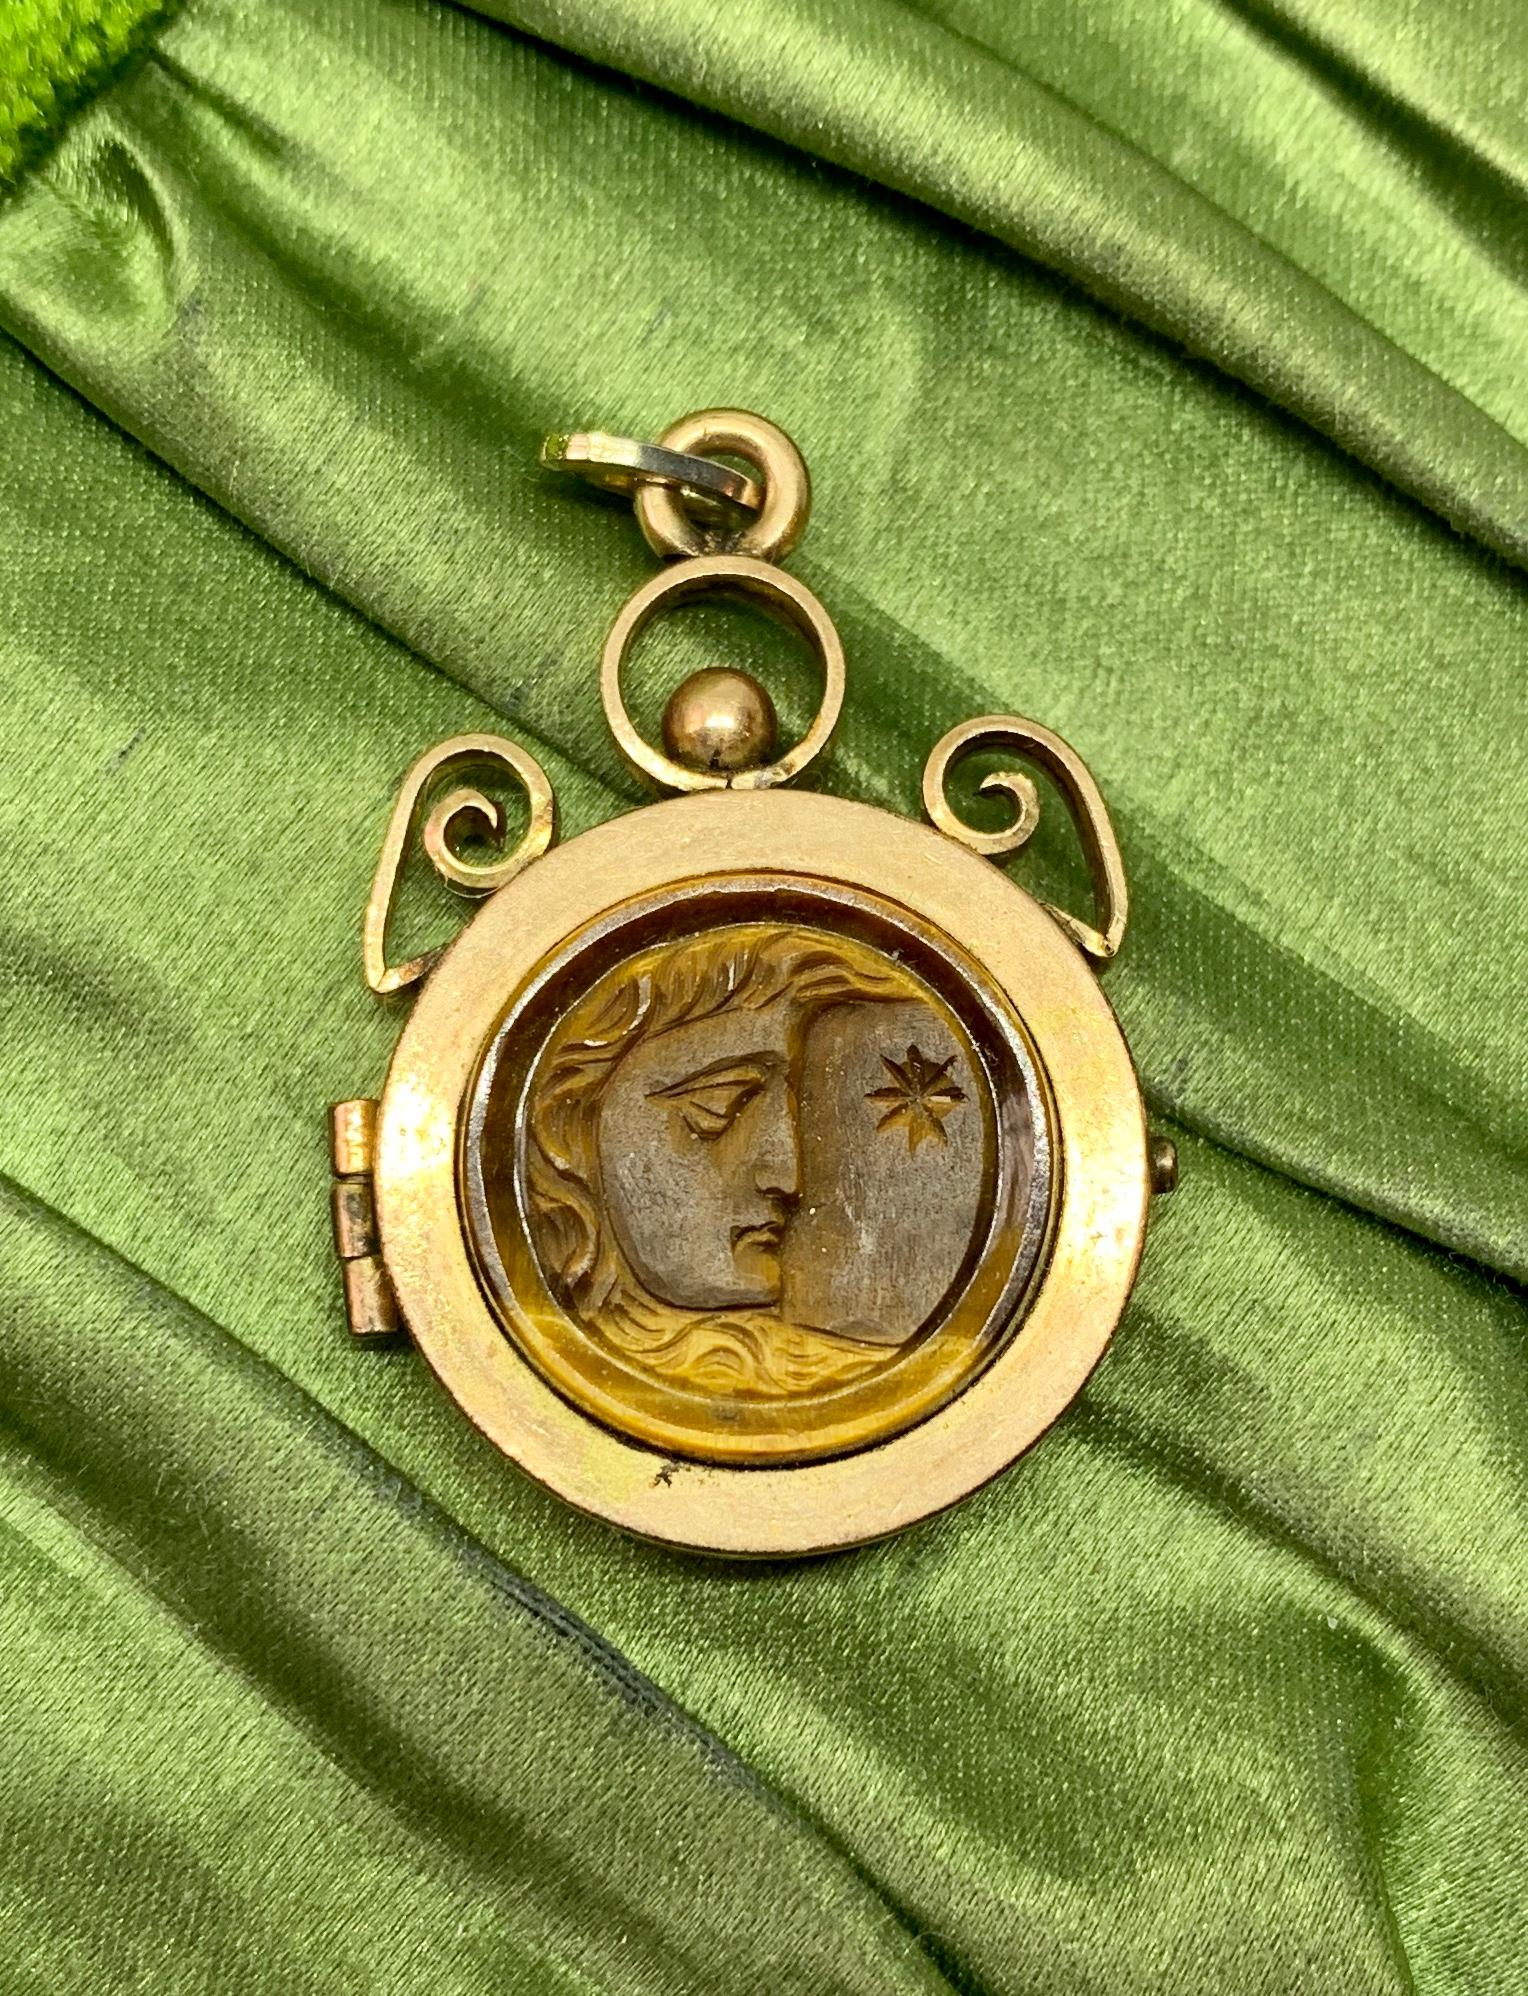 This is a rare and wonderful antique Belle Epoque, Victorian locket pendant with a beautiful hand carved Tiger's Eye gem with a fabulous image of a man in the moon with the sun or star.  This may be the god Apollo as well.  The radiant shimmering